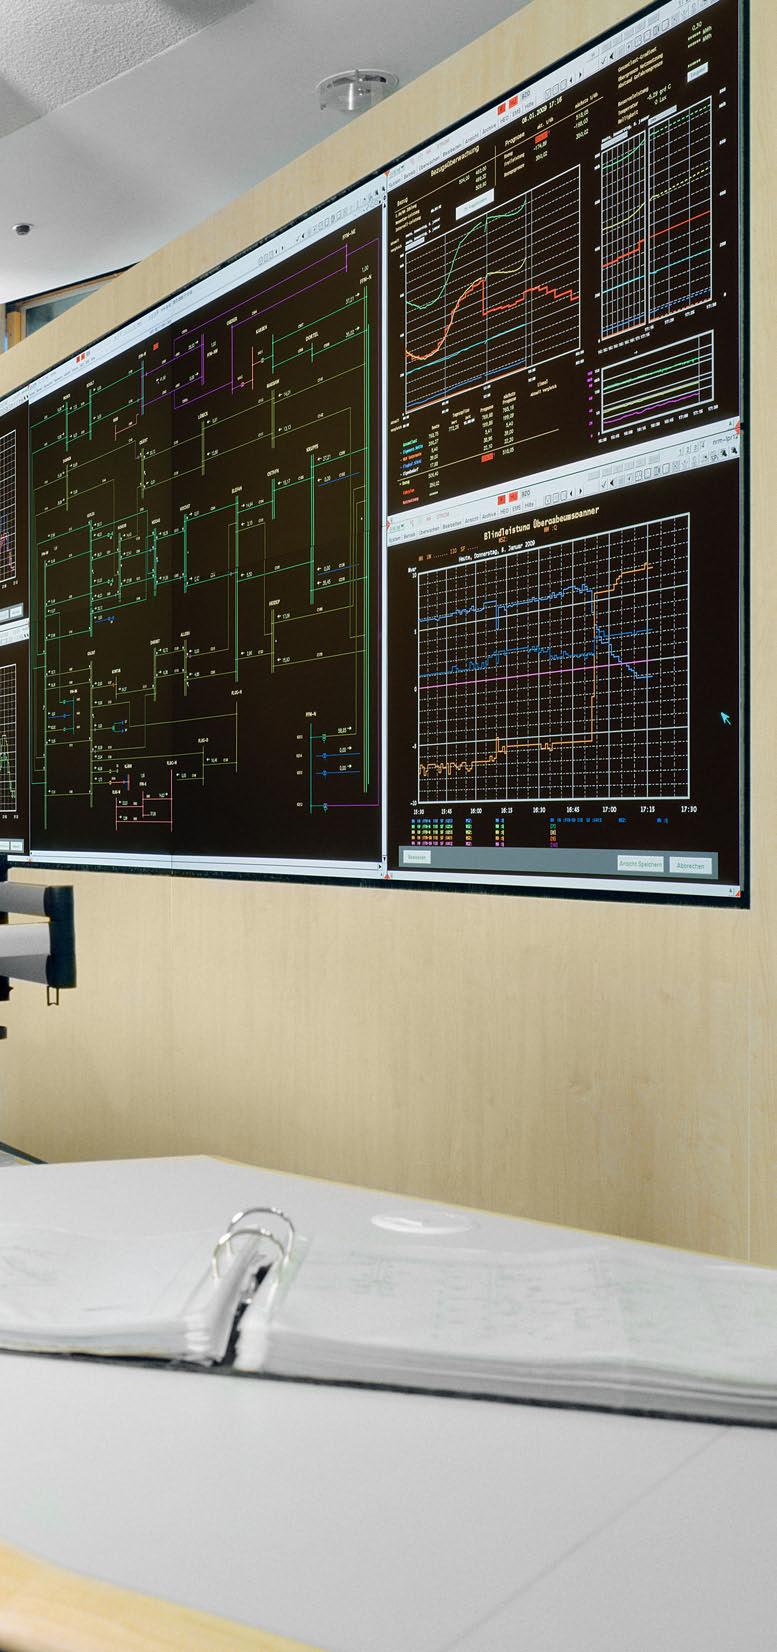 Emergency operation centers, power plants, traffic management centers and other control rooms are all about monitoring business-critical or even life-critical operations, 24 hours a day, 365 days per